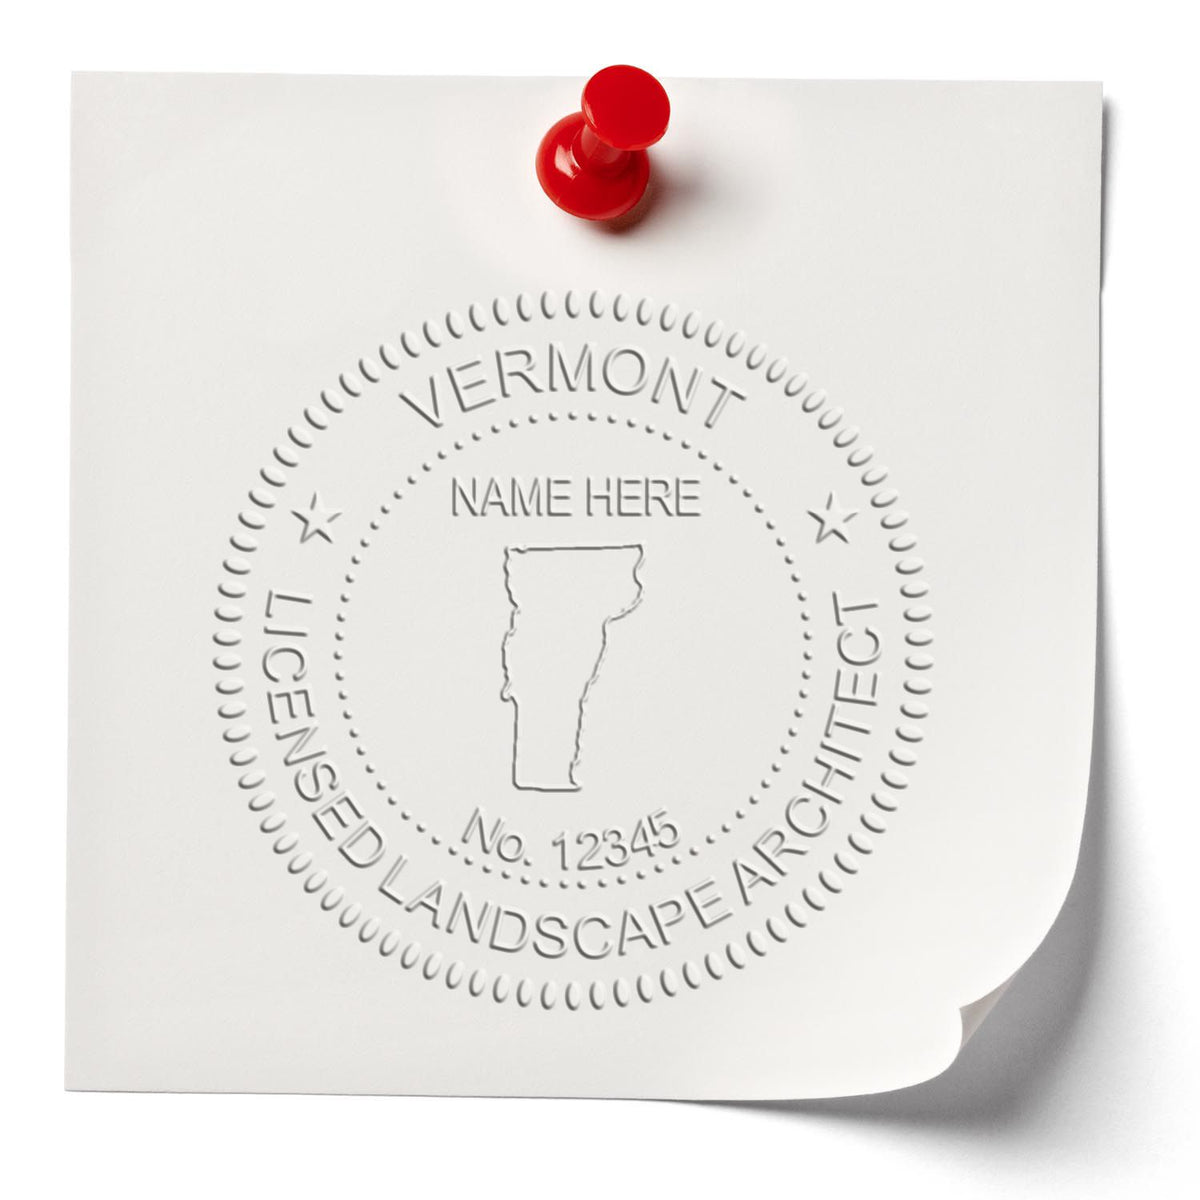 The Soft Pocket Vermont Landscape Architect Embosser stamp impression comes to life with a crisp, detailed photo on paper - showcasing true professional quality.